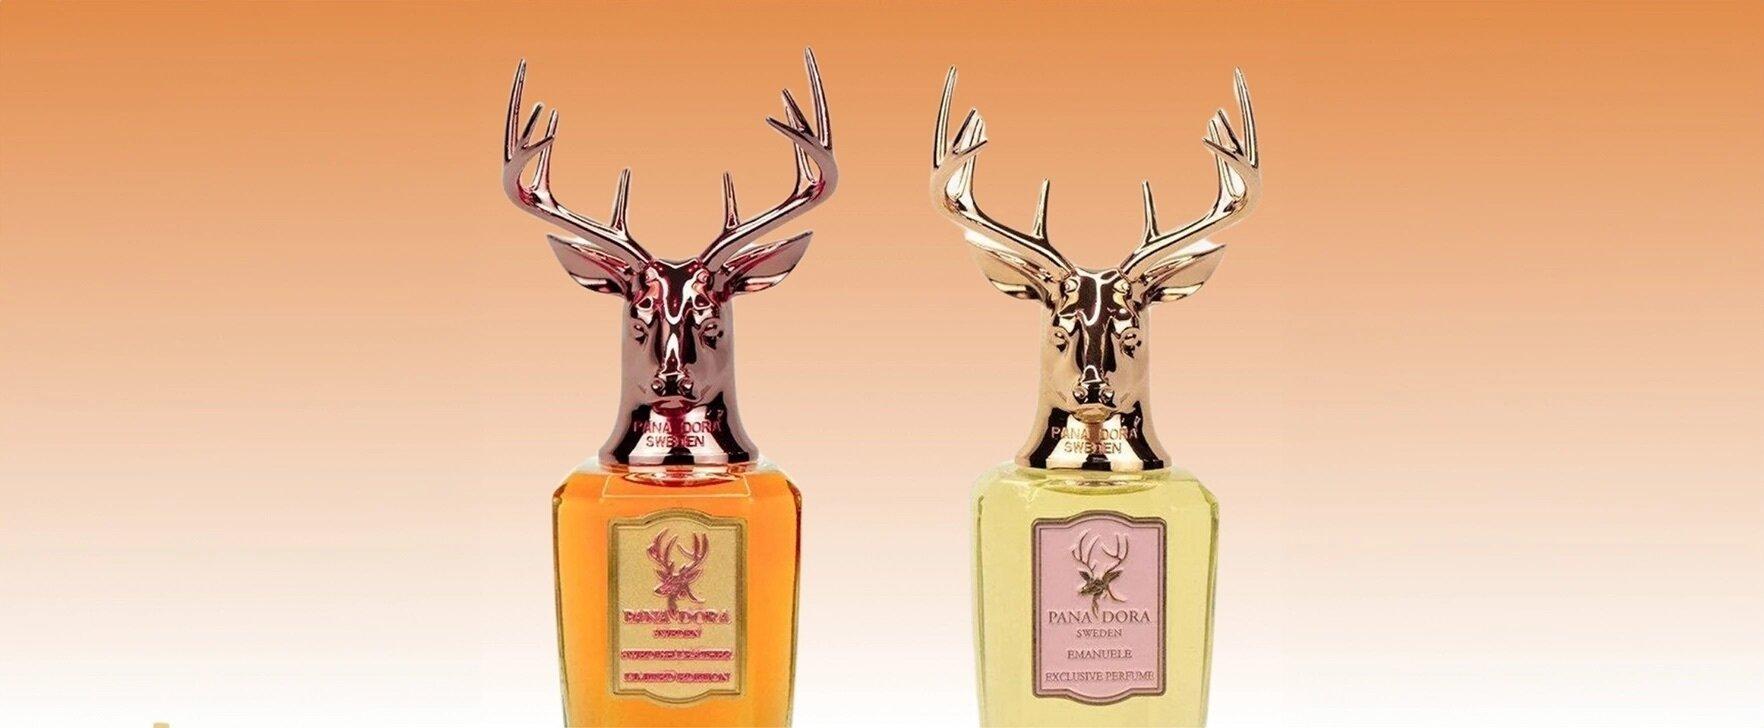 Fragrance Journeys Through Sweden and Milan: "Swedish Leather" and "Emanuele" by Pana Dora